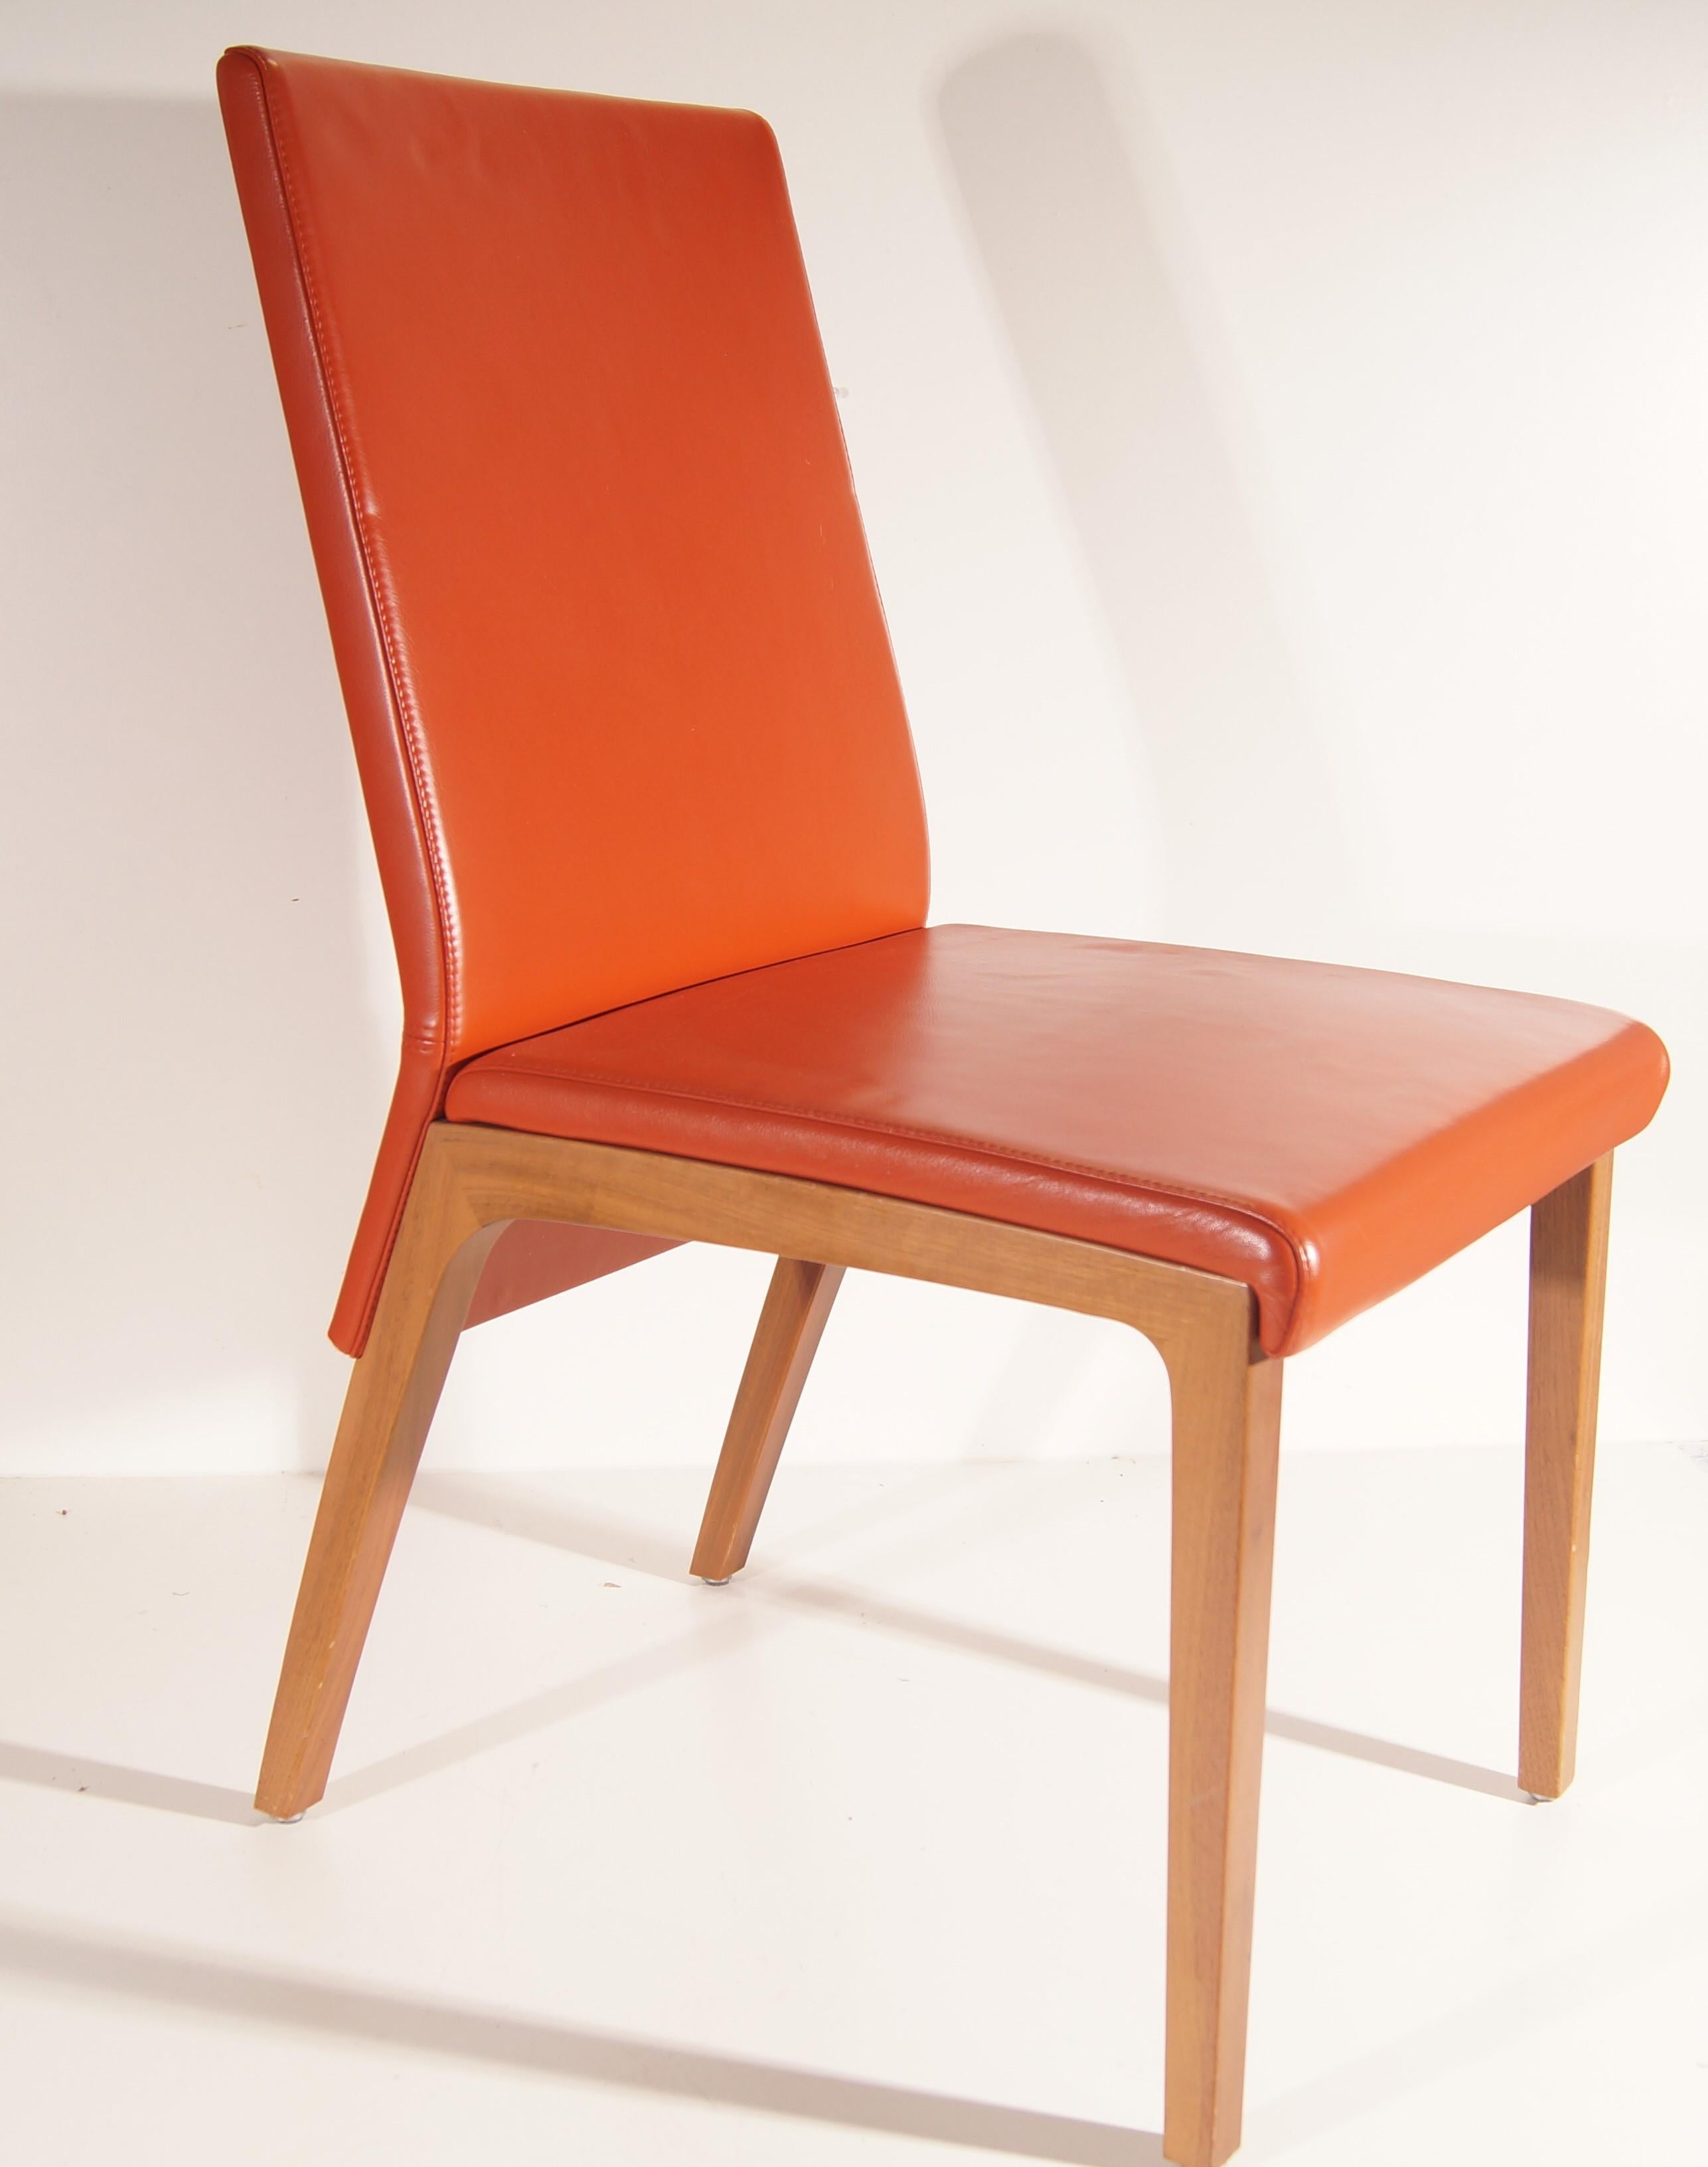 Rolf Benz - Dining room chair in orange leather 4